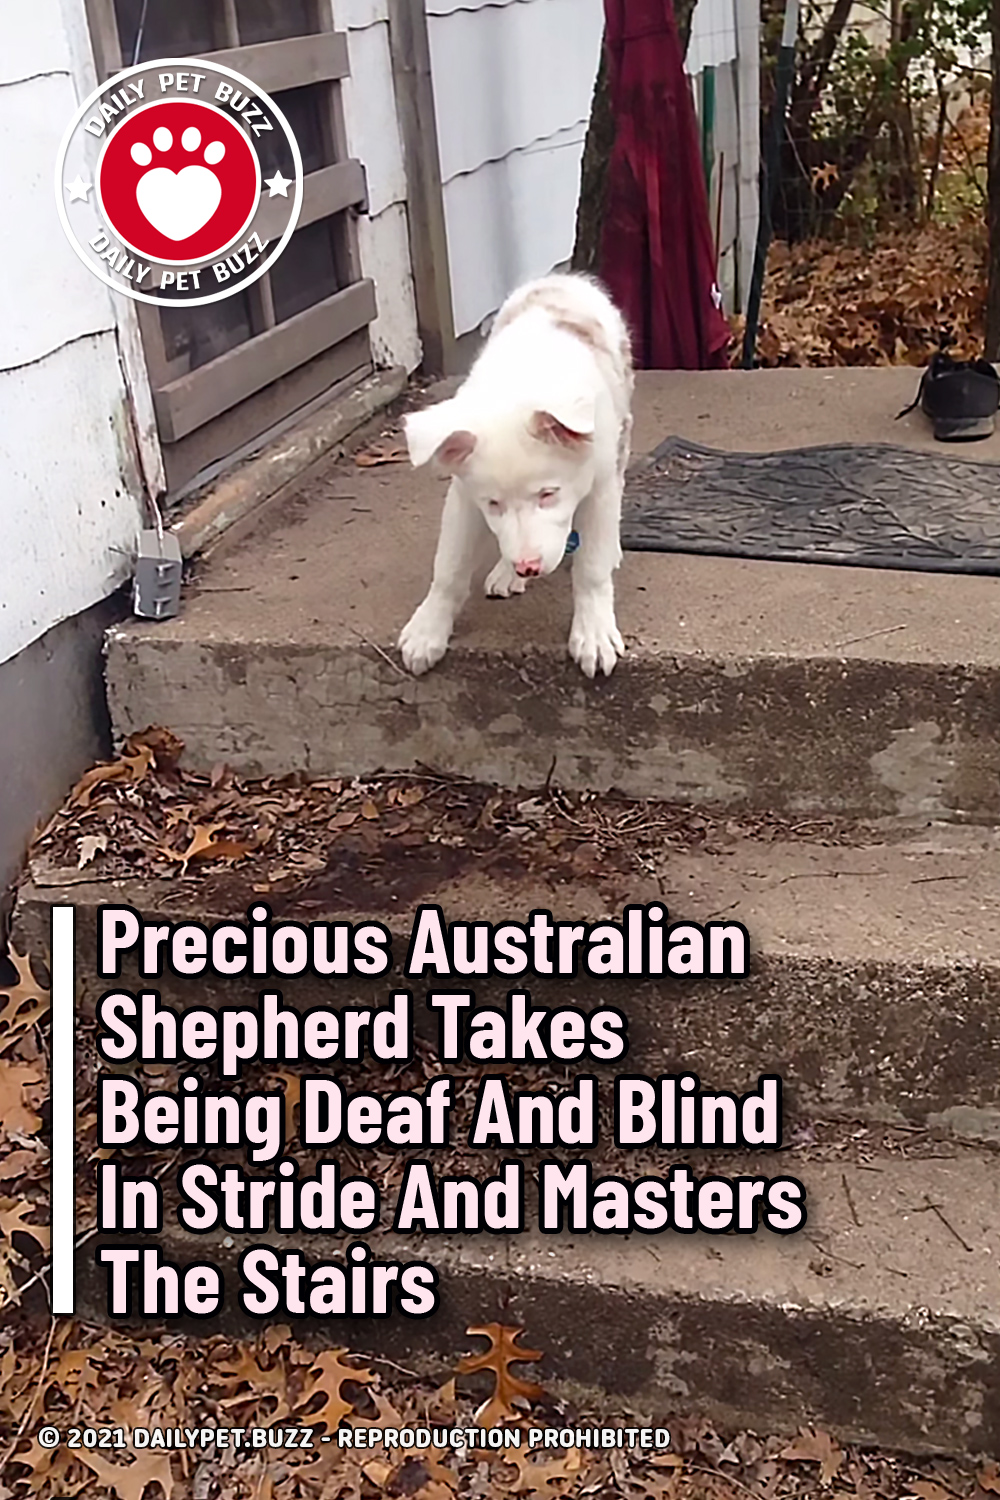 Precious Australian Shepherd Takes Being Deaf And Blind In Stride And Masters The Stairs